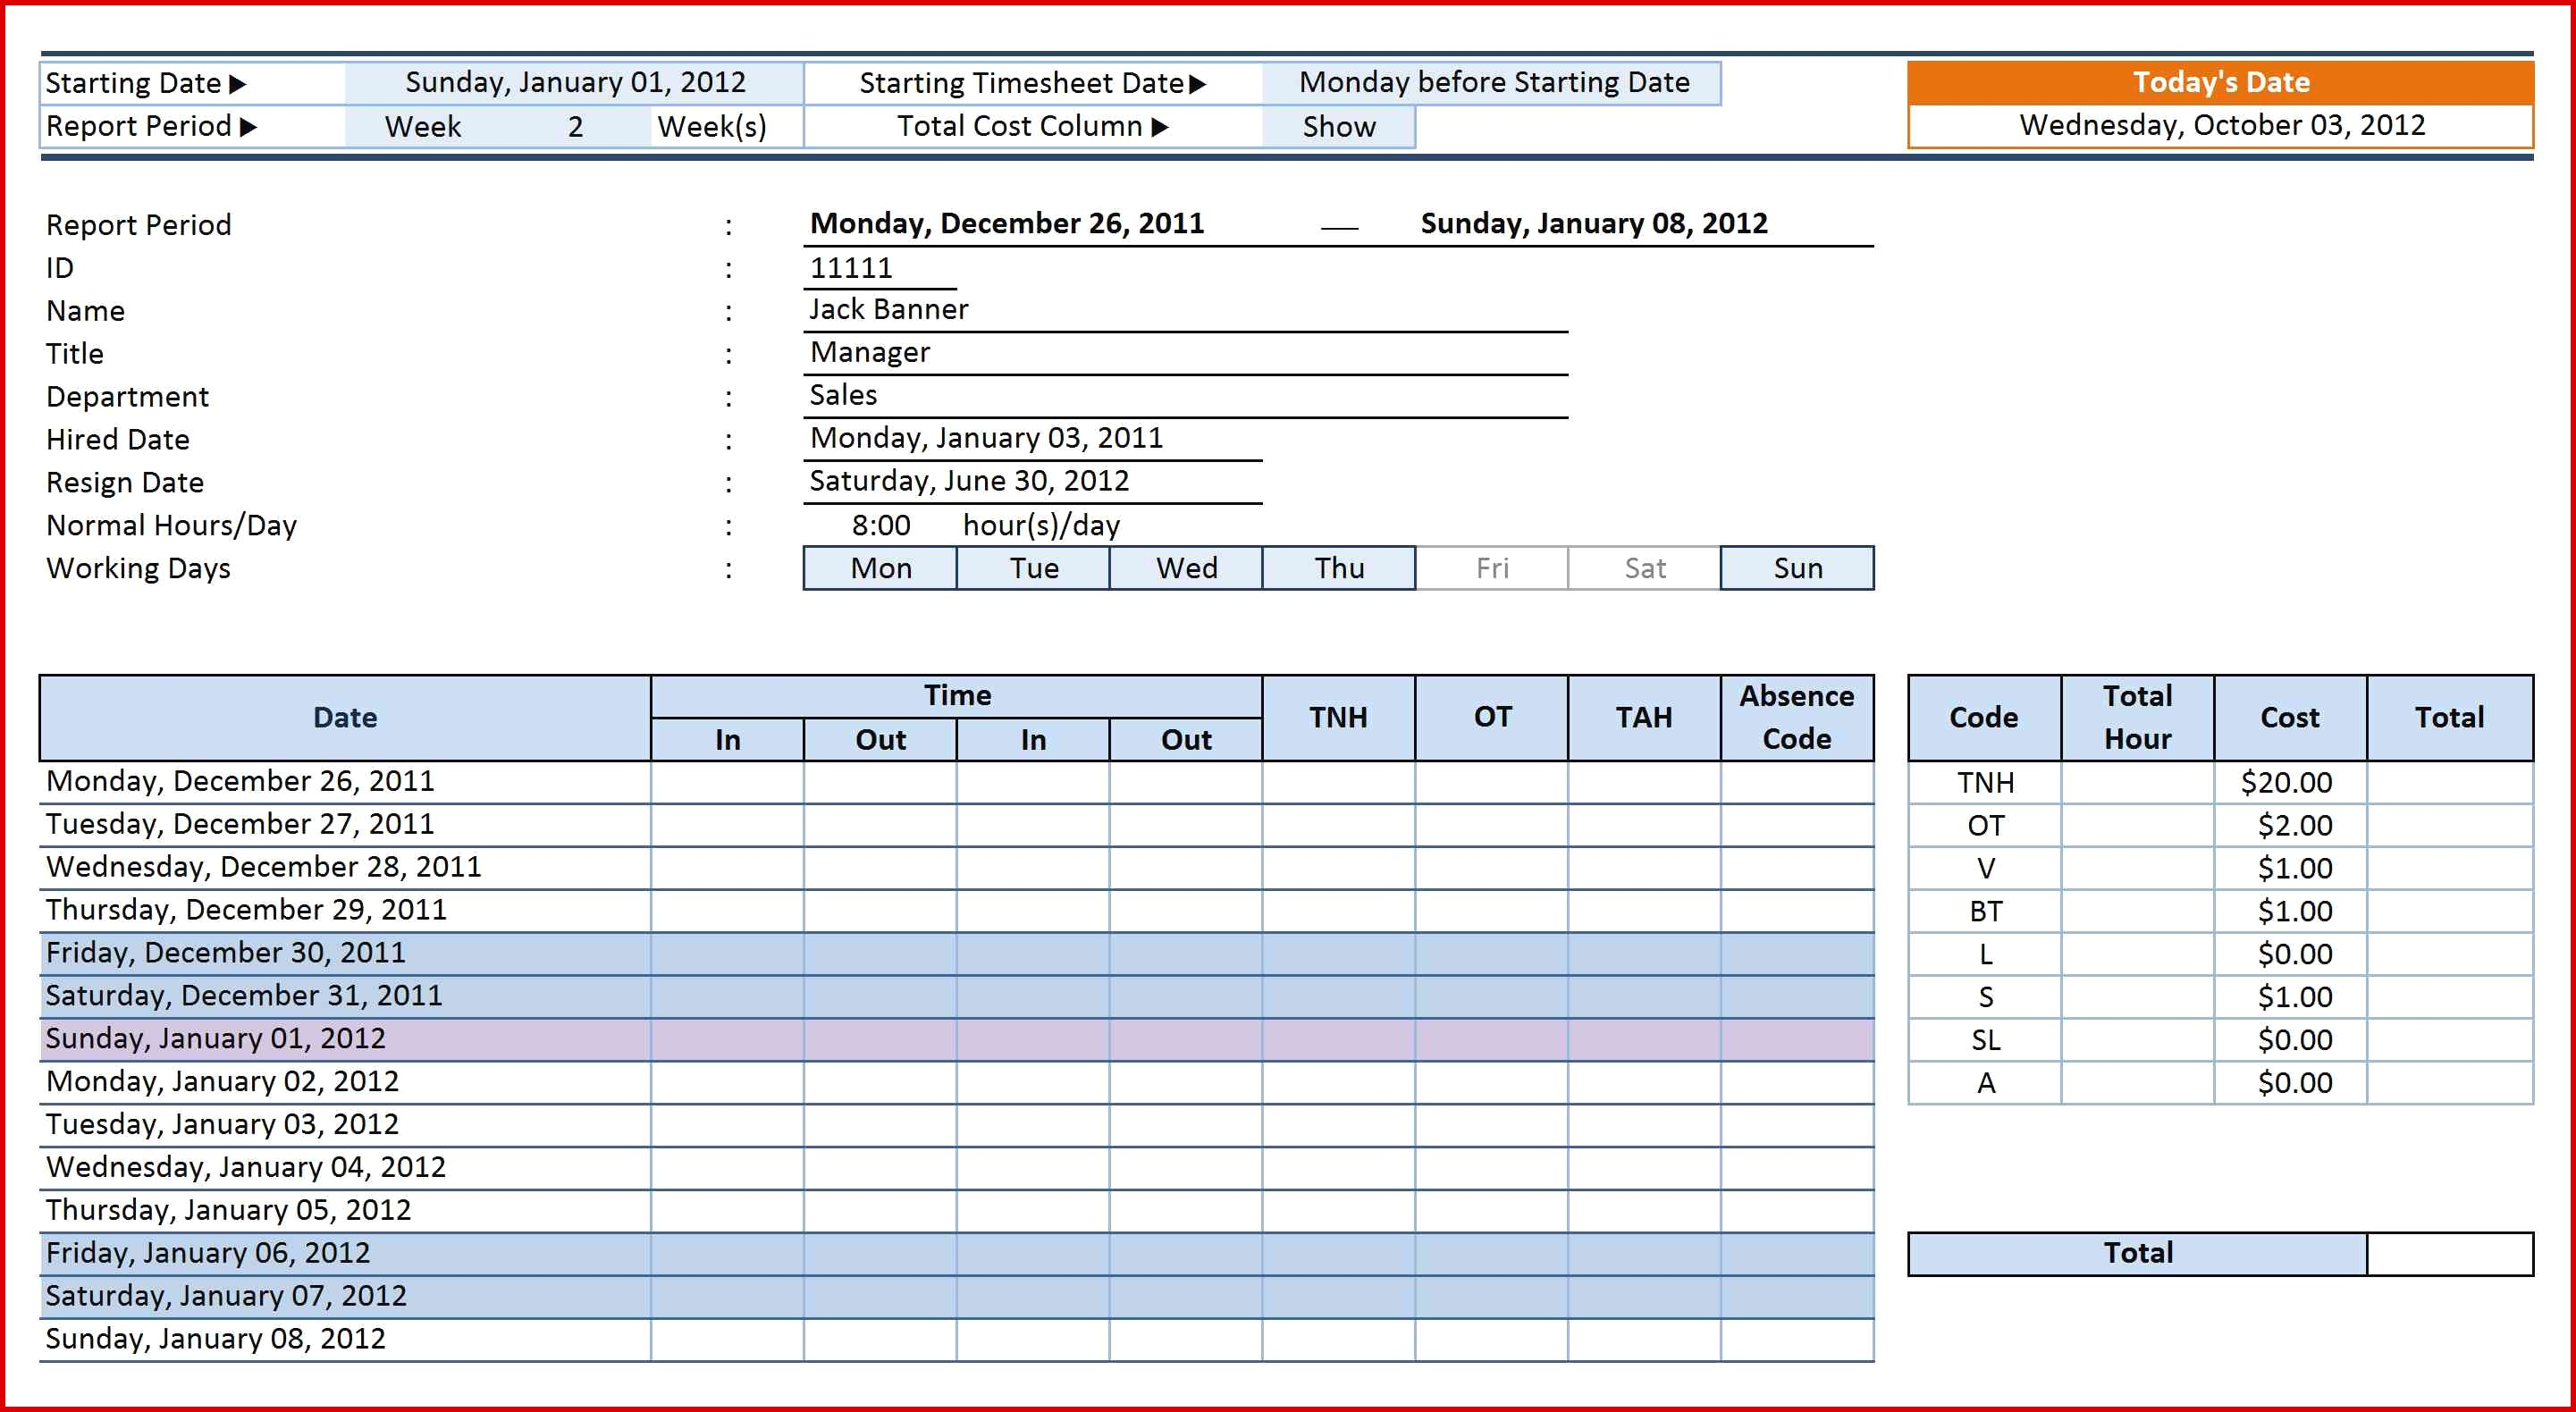 Leave Of Absence Tracking Spreadsheet Within Awesome Absence Tracking Spreadsheet  Wing Scuisine